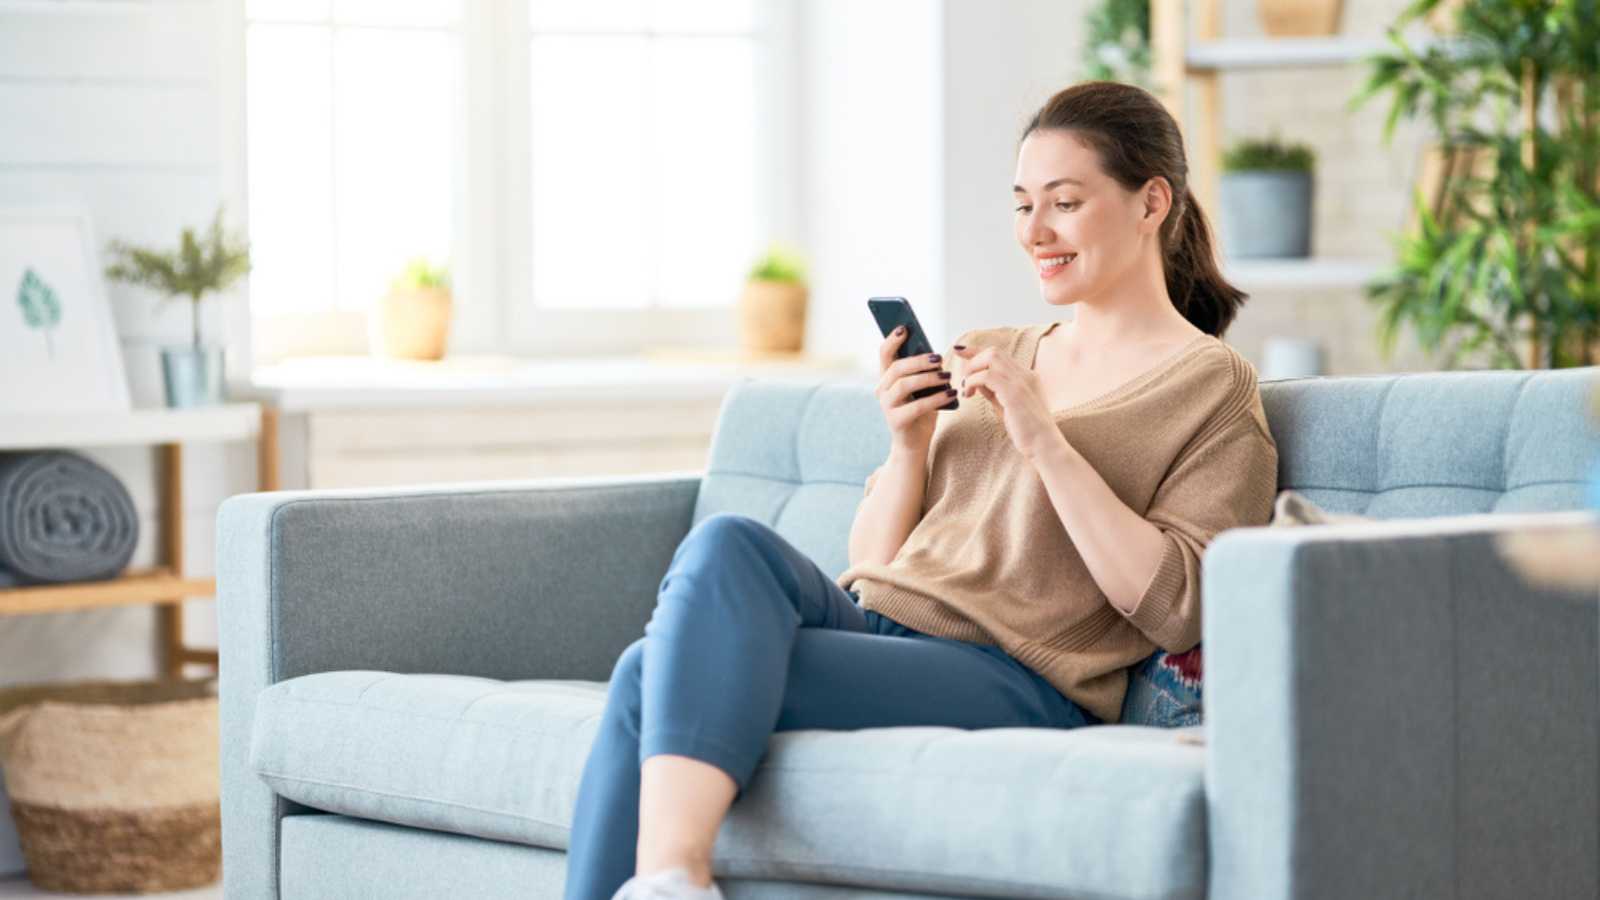 Woman Looking At Mobile In Sofa